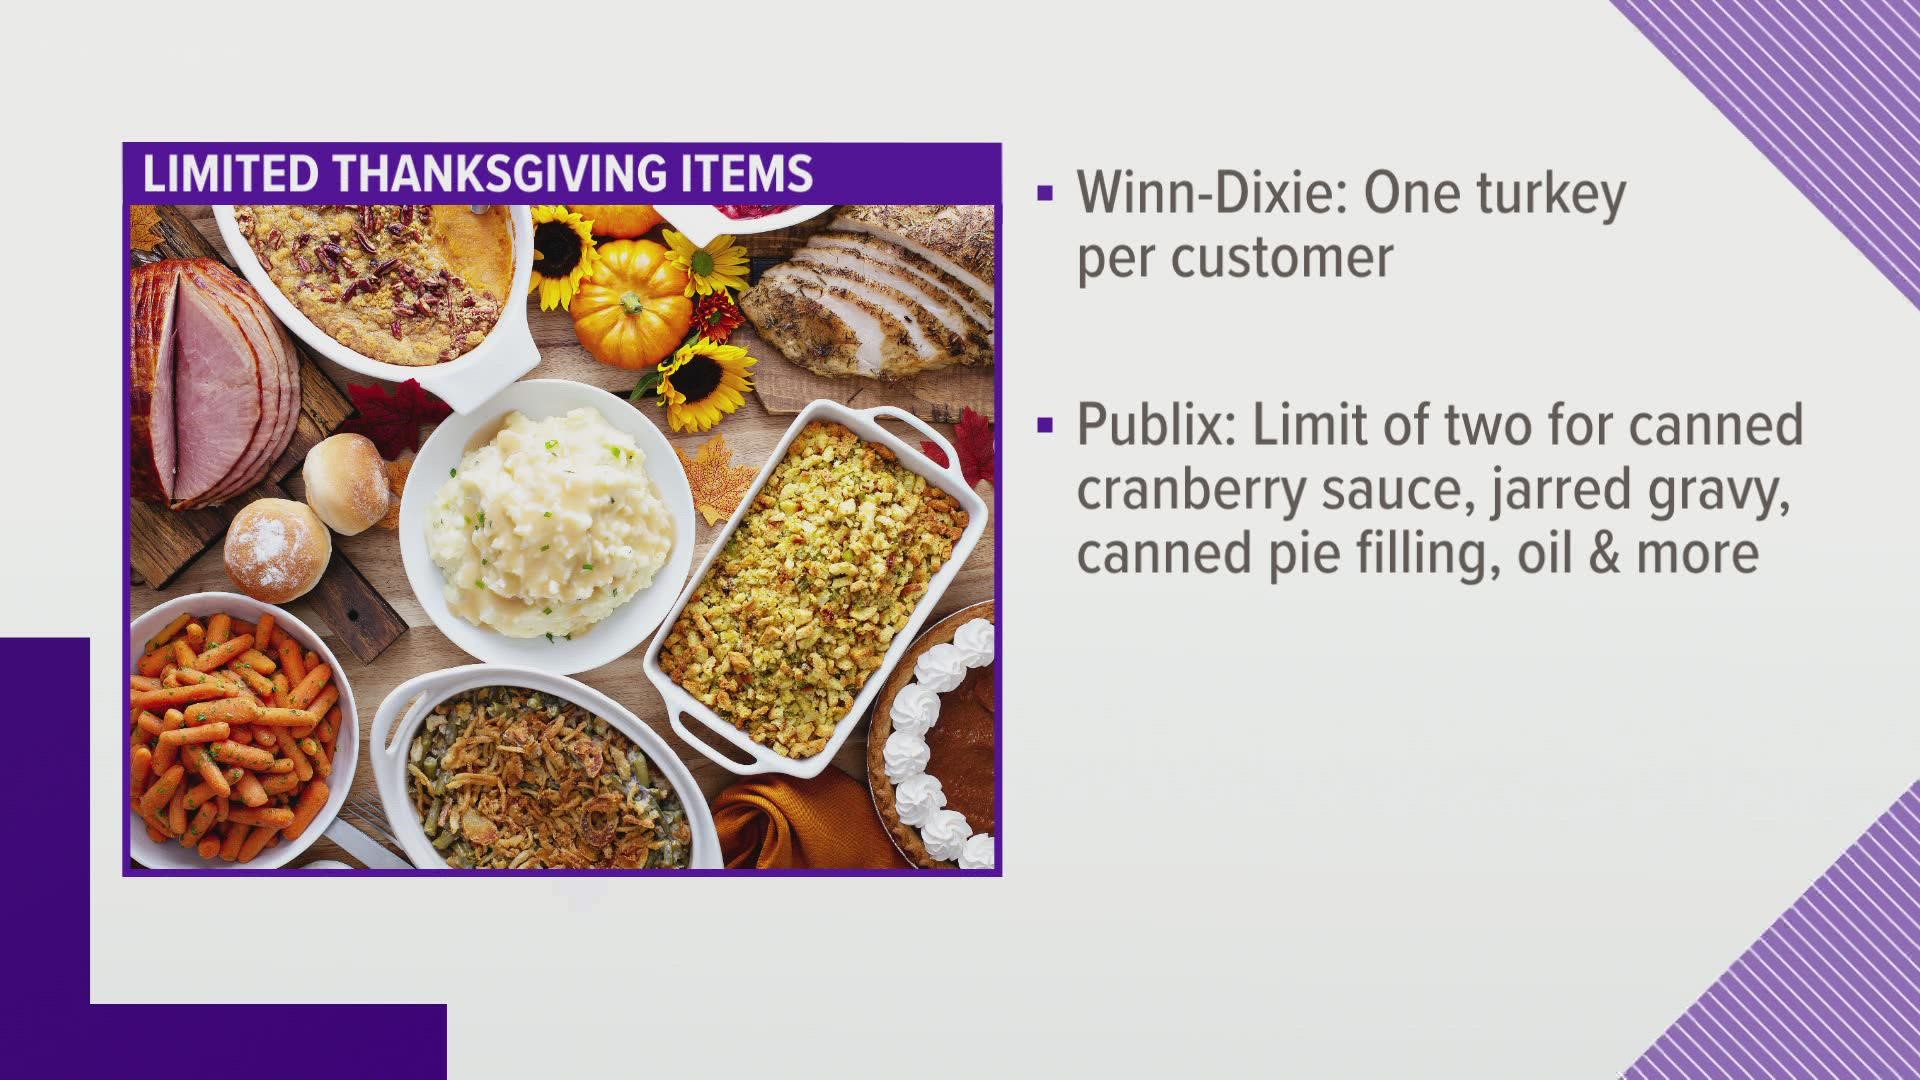 The limit only pertains to turkeys, but Winn-Dixie leadership officials are asking customers to only purchase what's needed for their household.